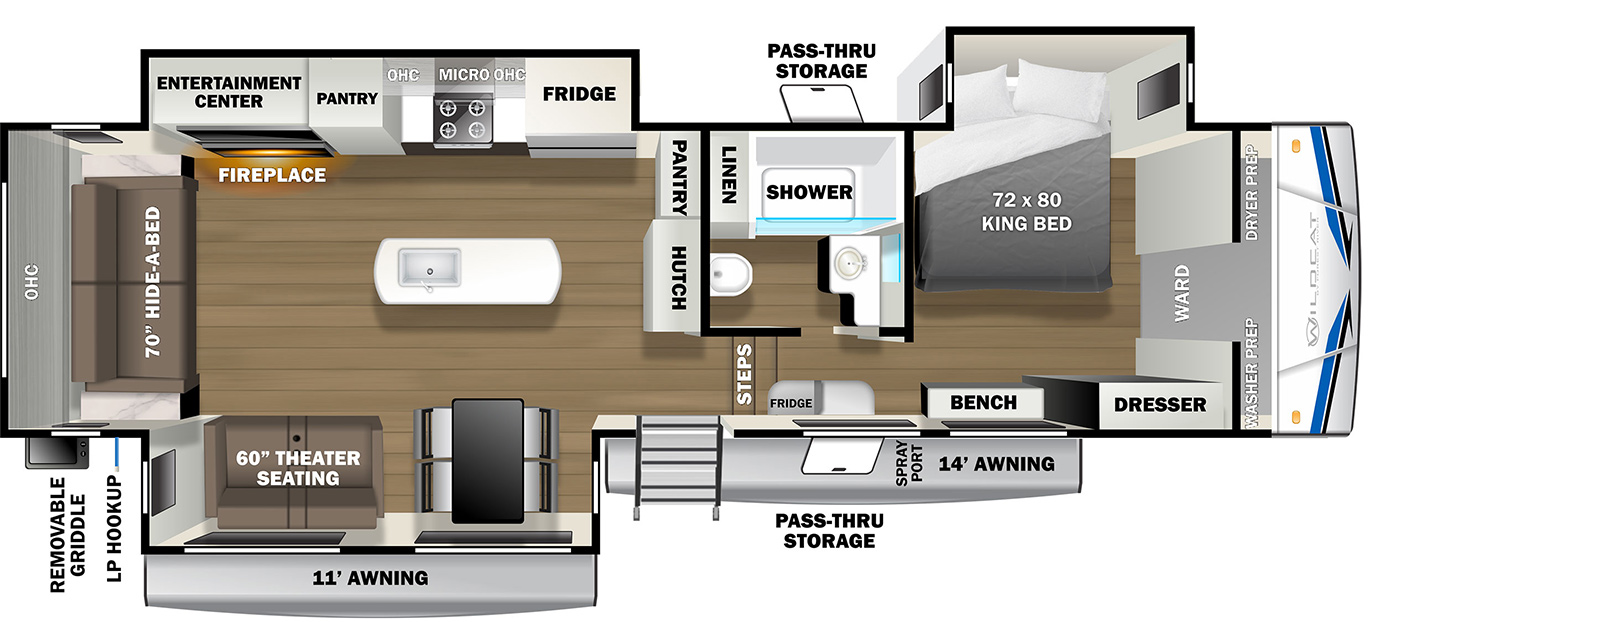 Wildcat Fifth Wheels 333RLBS floorplan. The 333RLBS has 3 slide outs and one entry door.